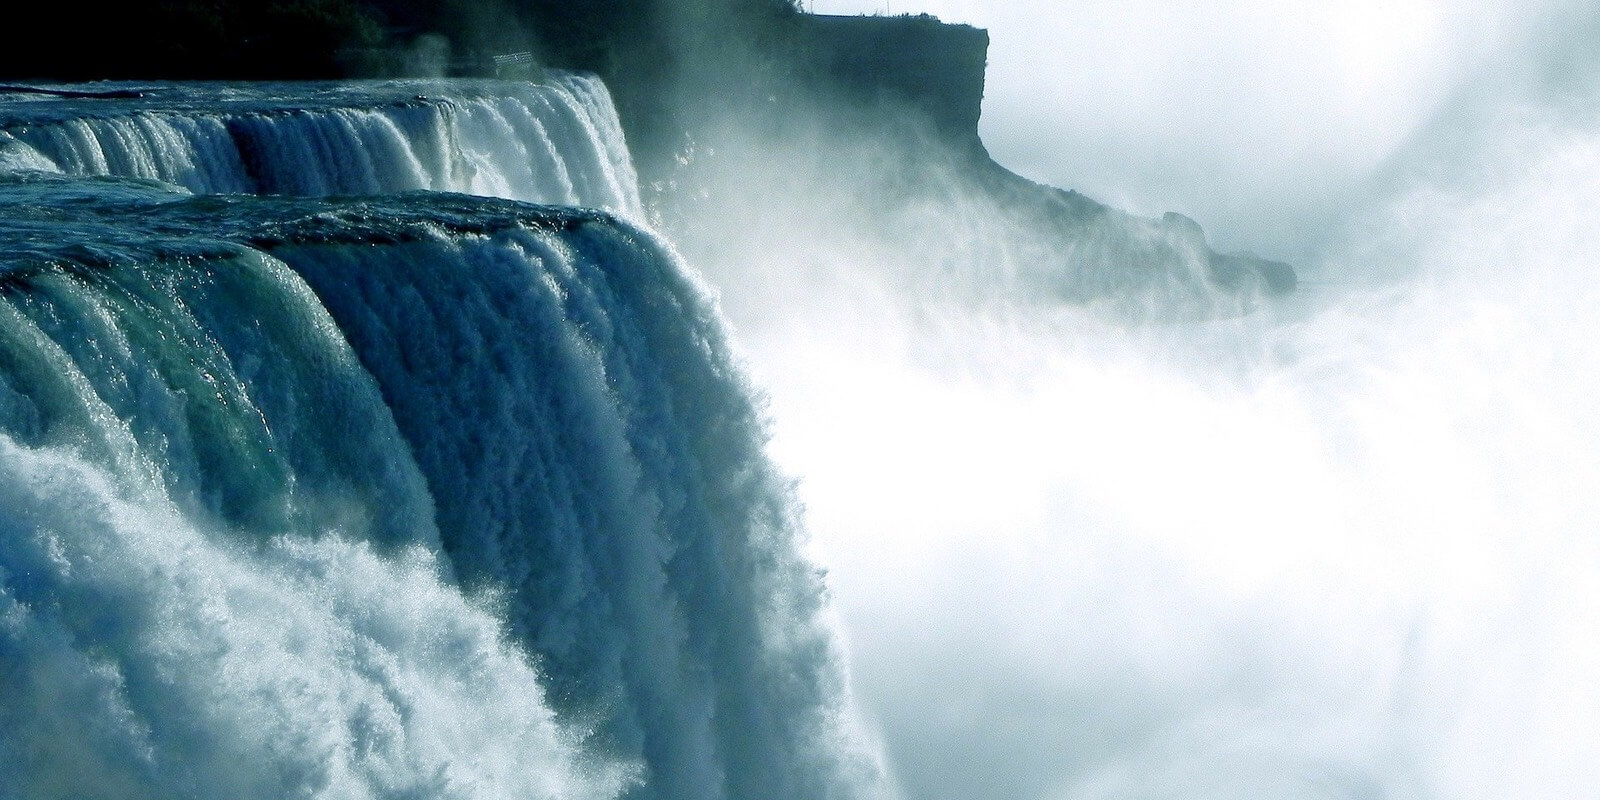 A massive waterfall falling into a large cloud of mist.